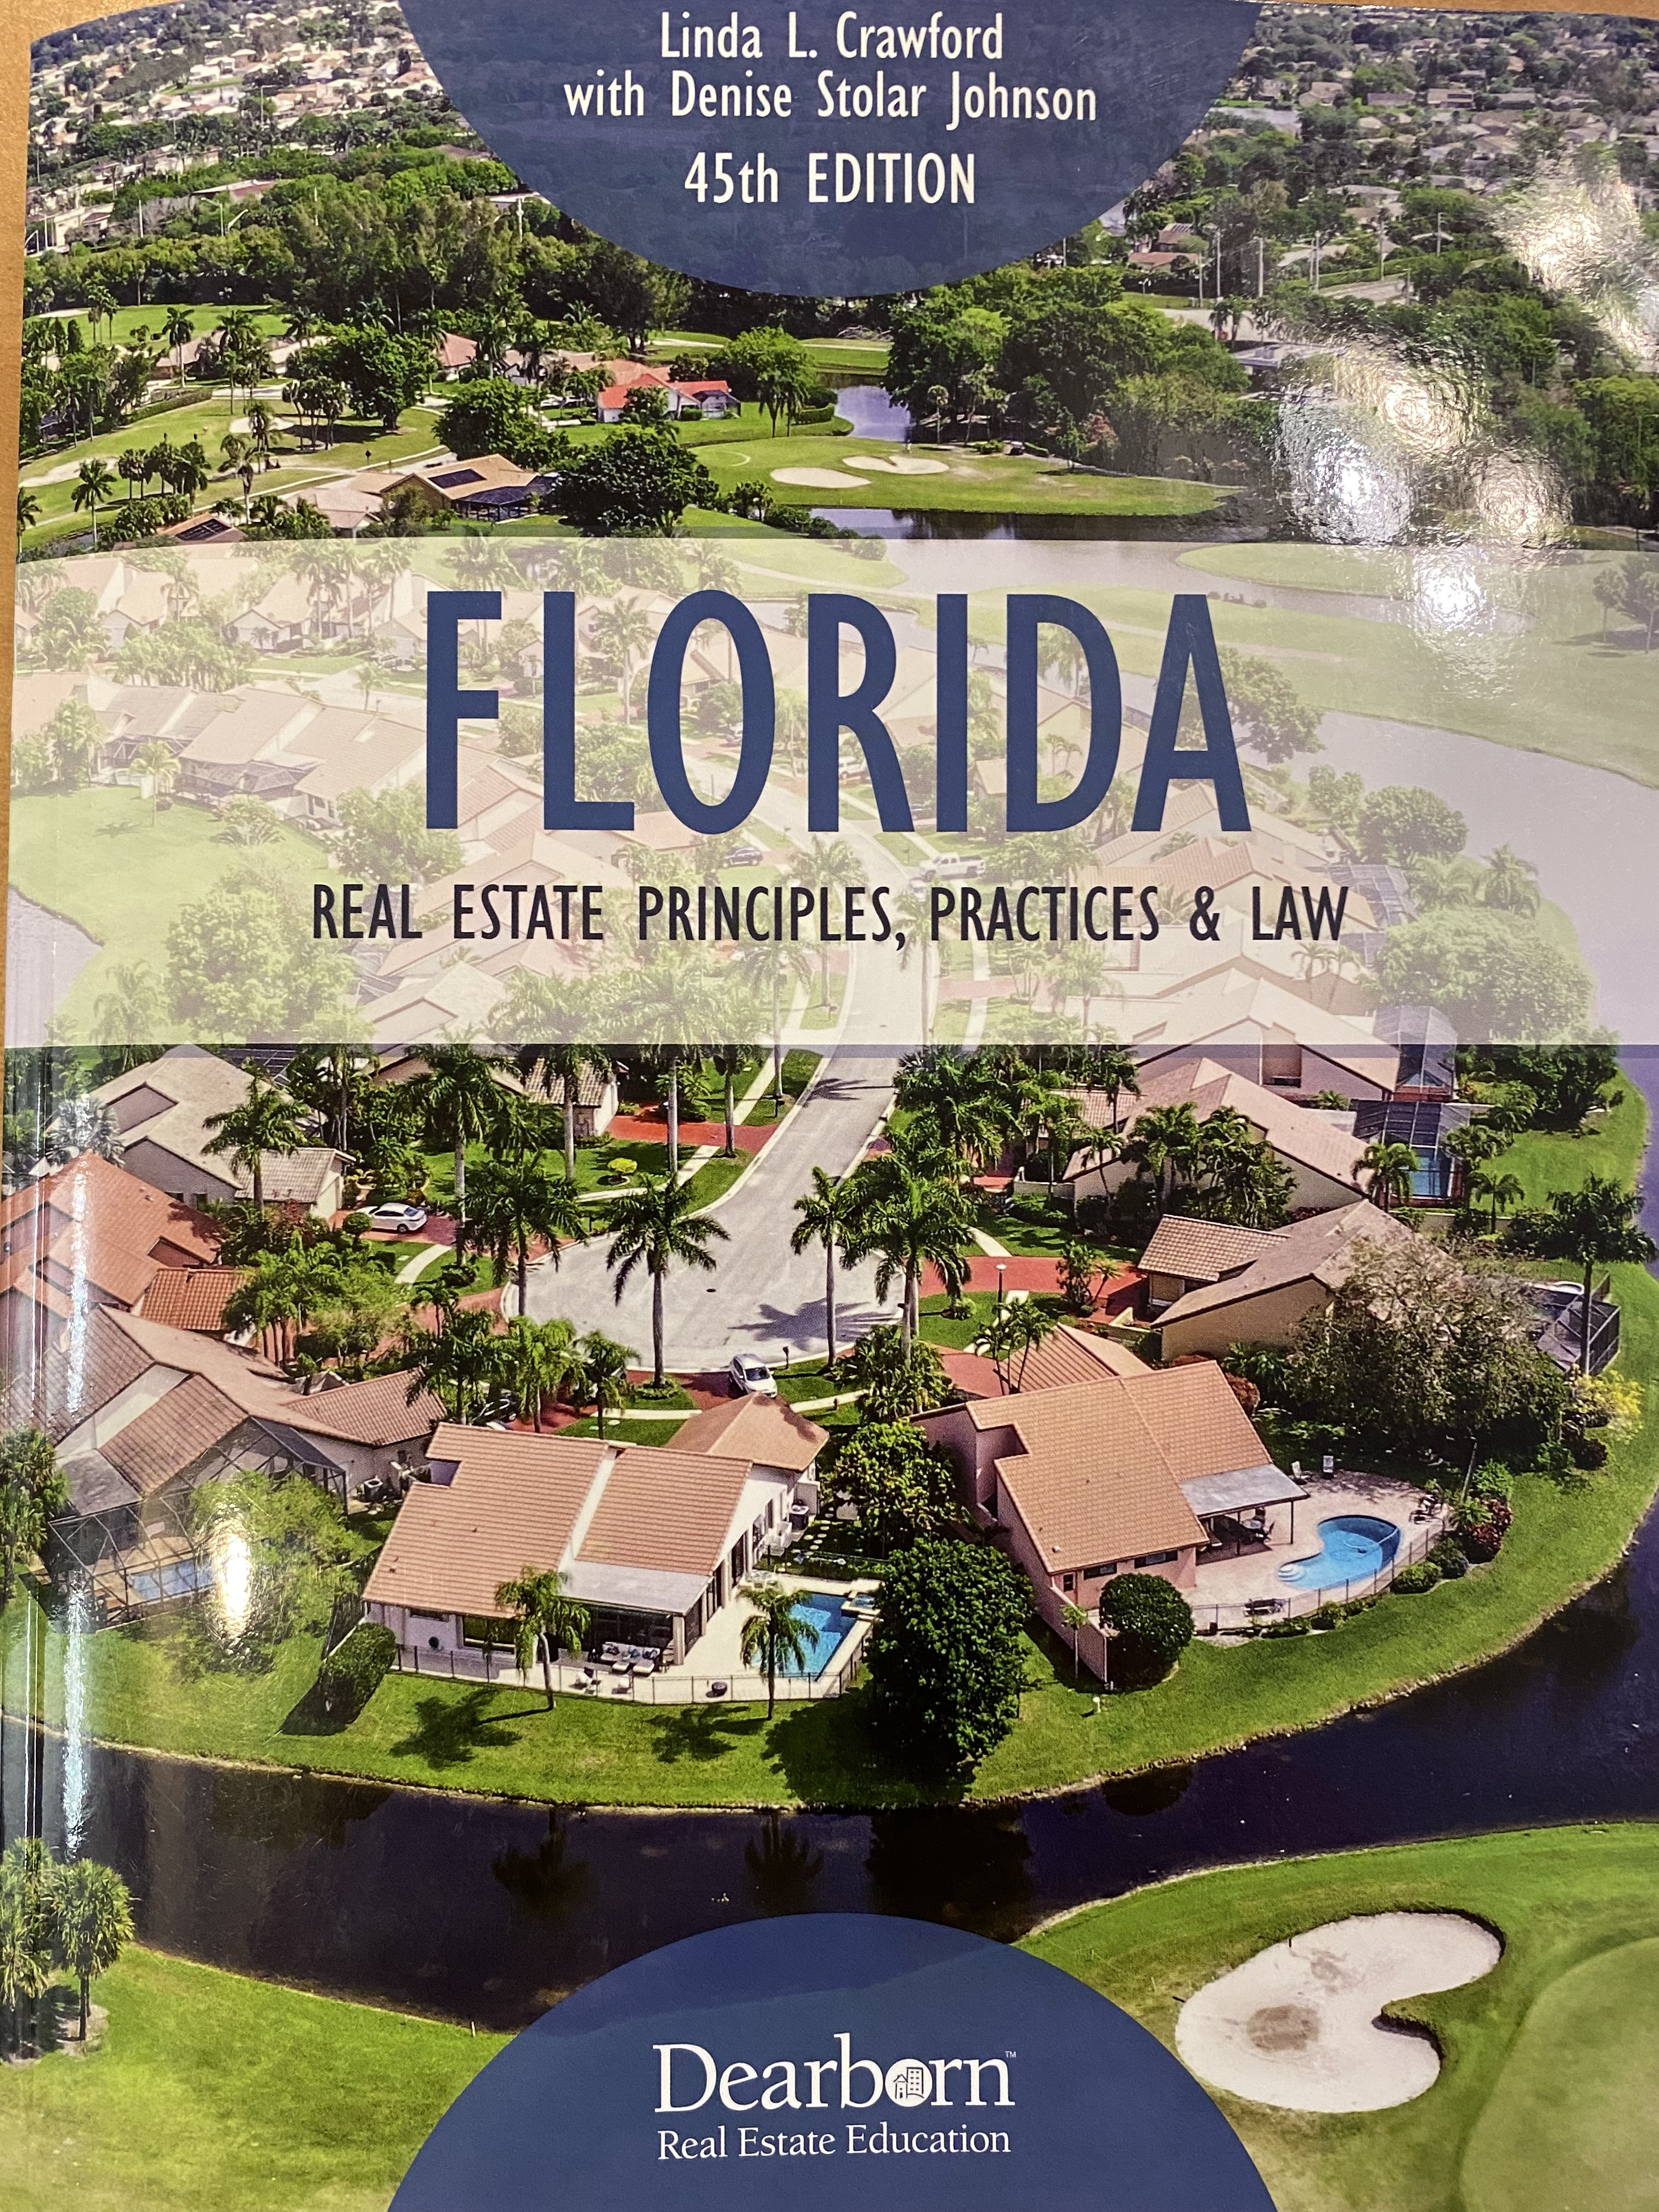 Florida Real Estate Principles, Practices and law